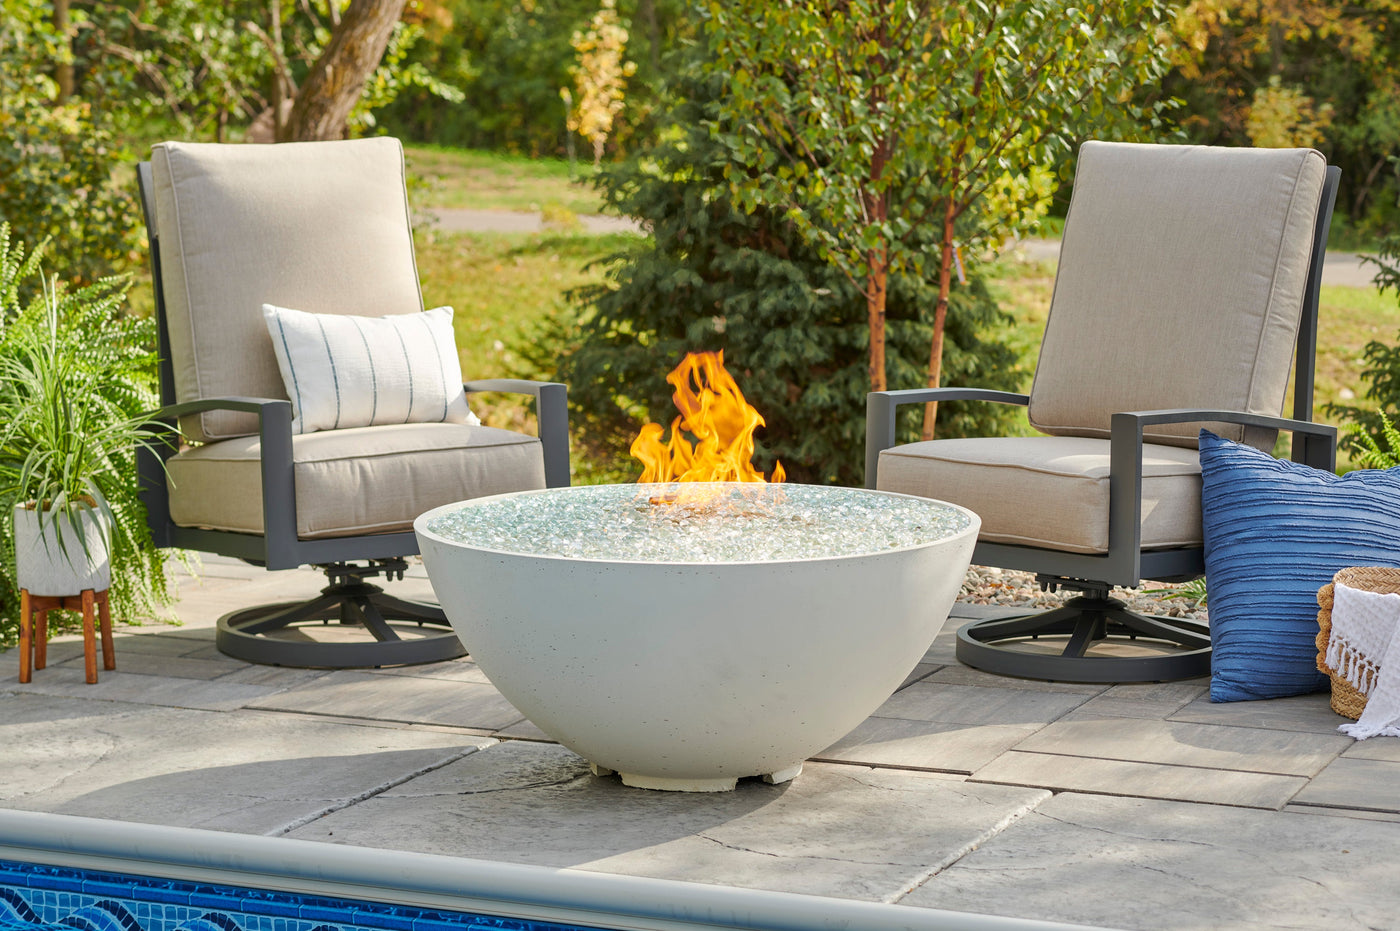 The Outdoor GreatRoom Company White Cove Edge 42" Round Gas Fire Pit Bowl